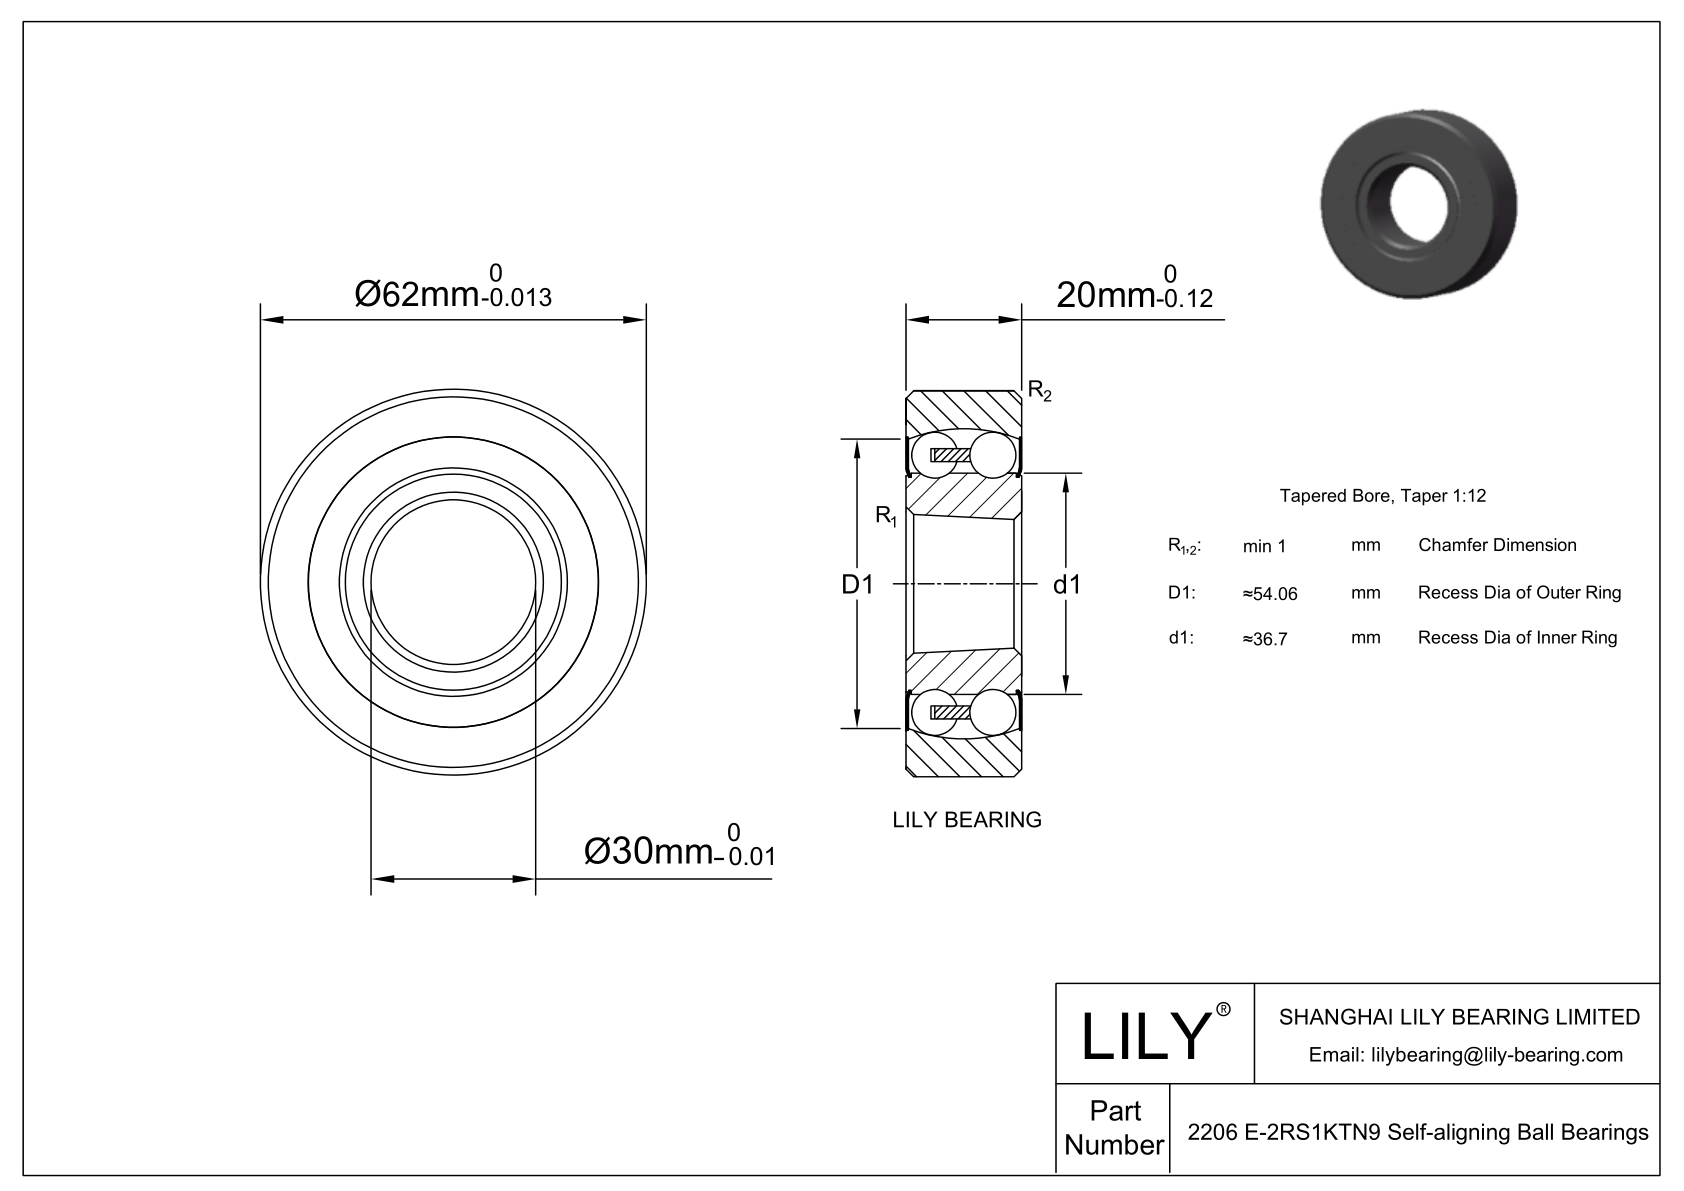 CE2206 E-SCPP Silicon Carbide Self Aligning Ball Bearings cad drawing